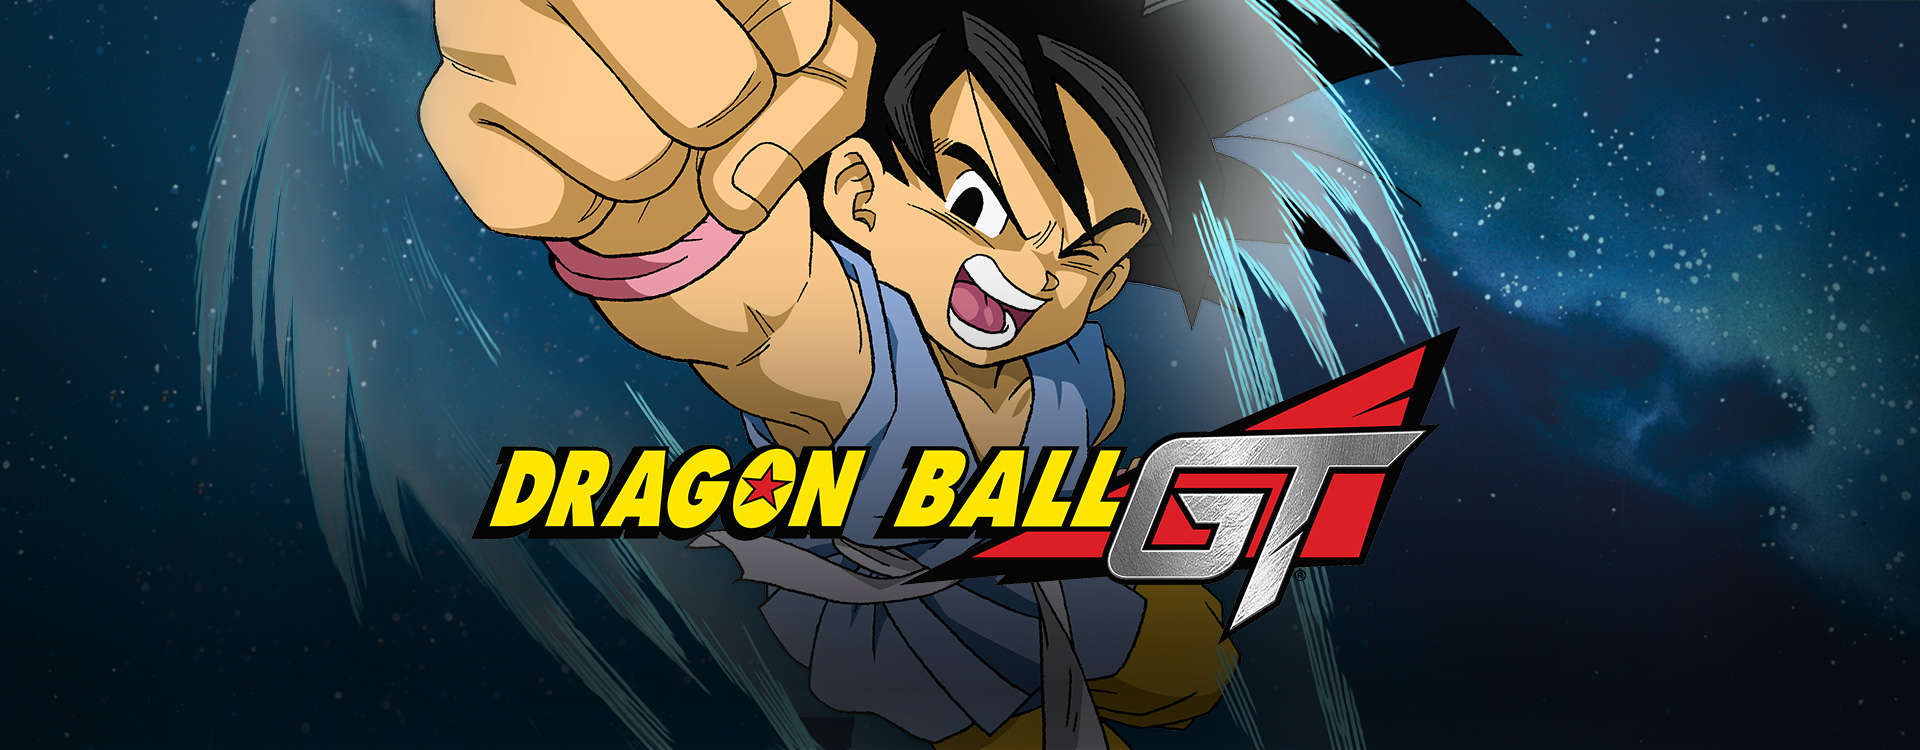 download dragon ball gt all episodes english torrent